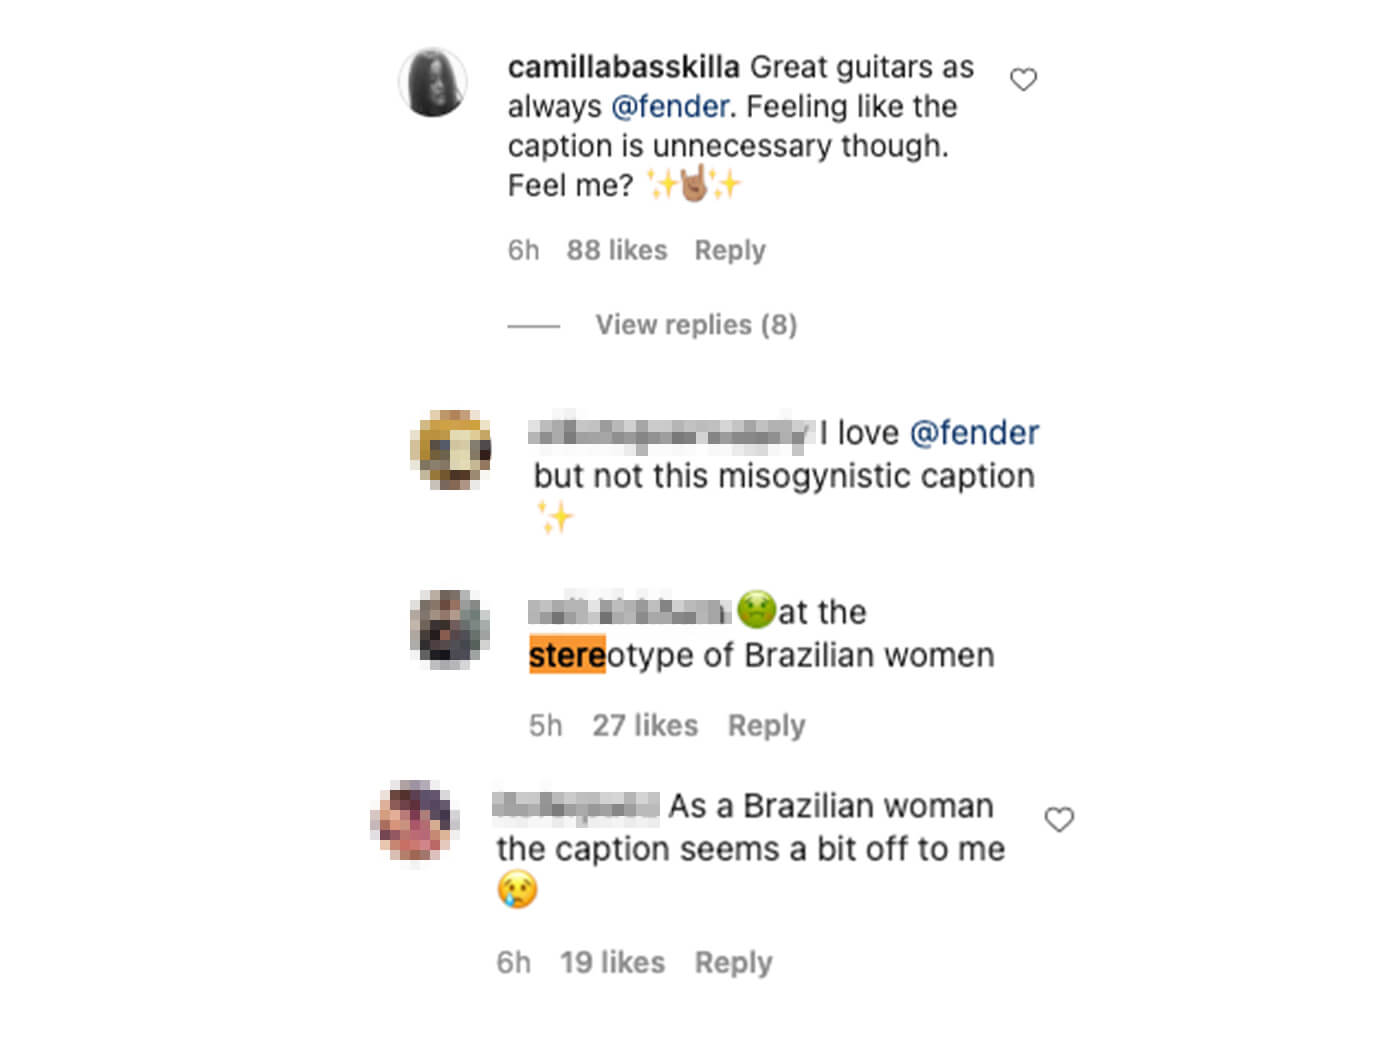 Comments on Fender's IG page